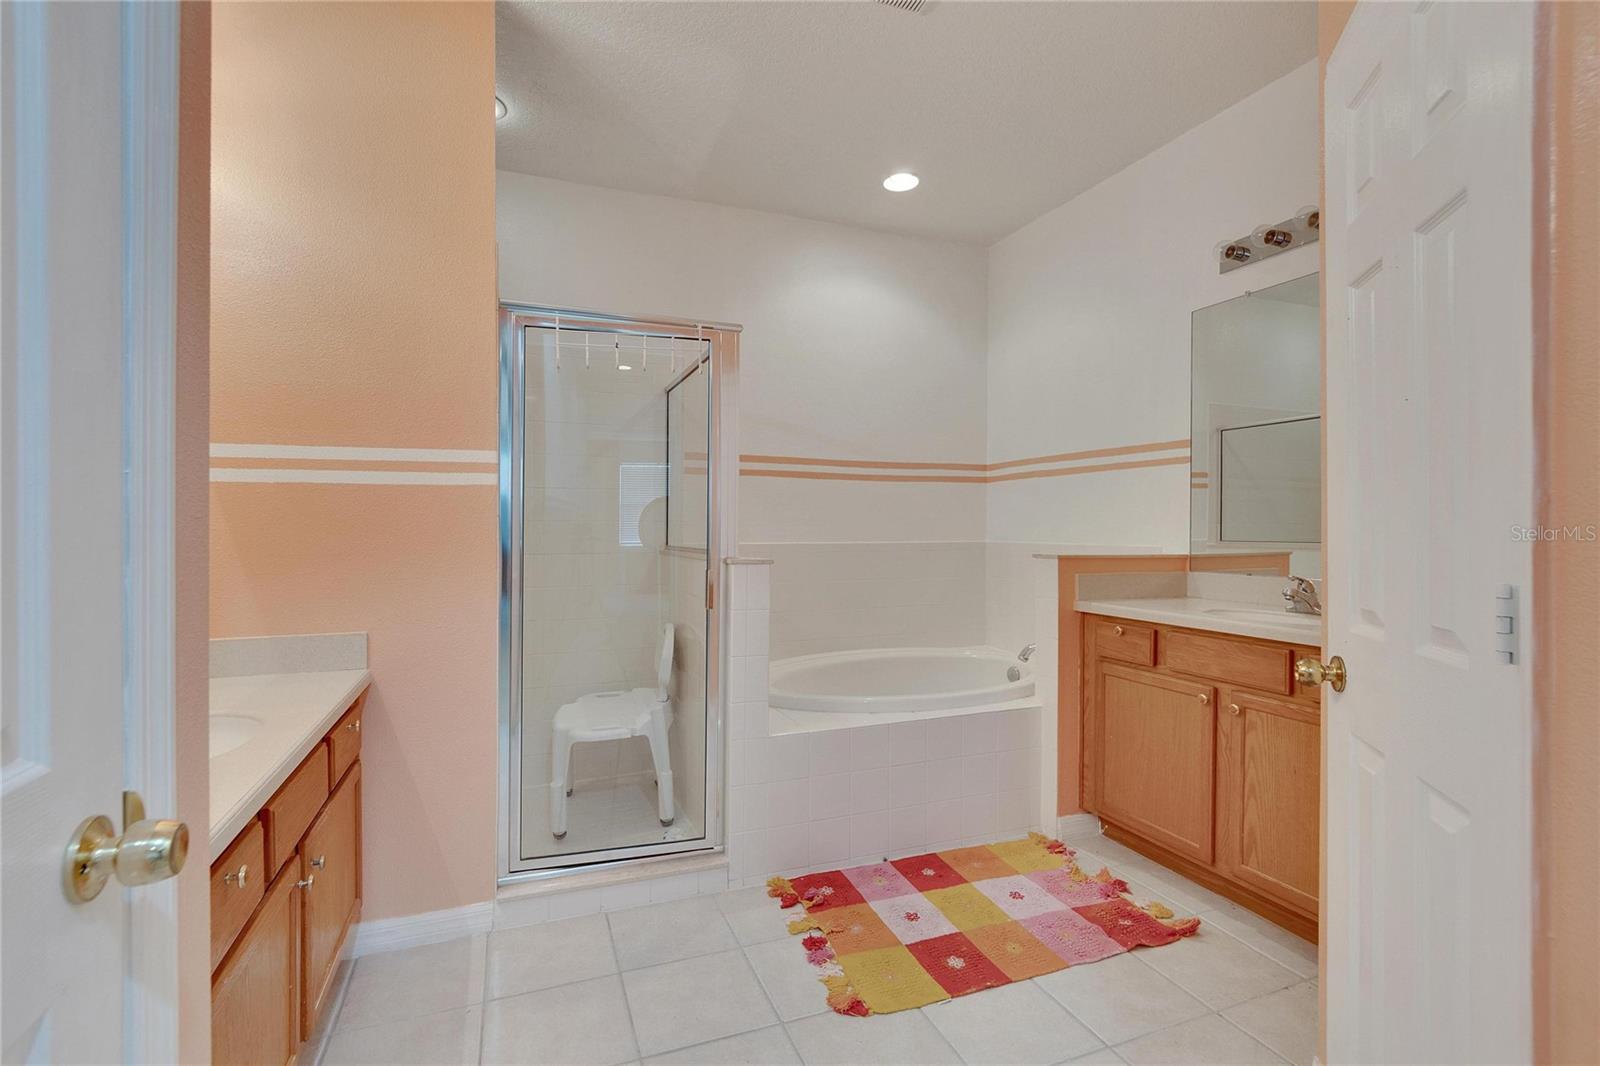 Primary En Suite with Split Vanities, Tub w/Separate Shower Stall and Private Water Closet